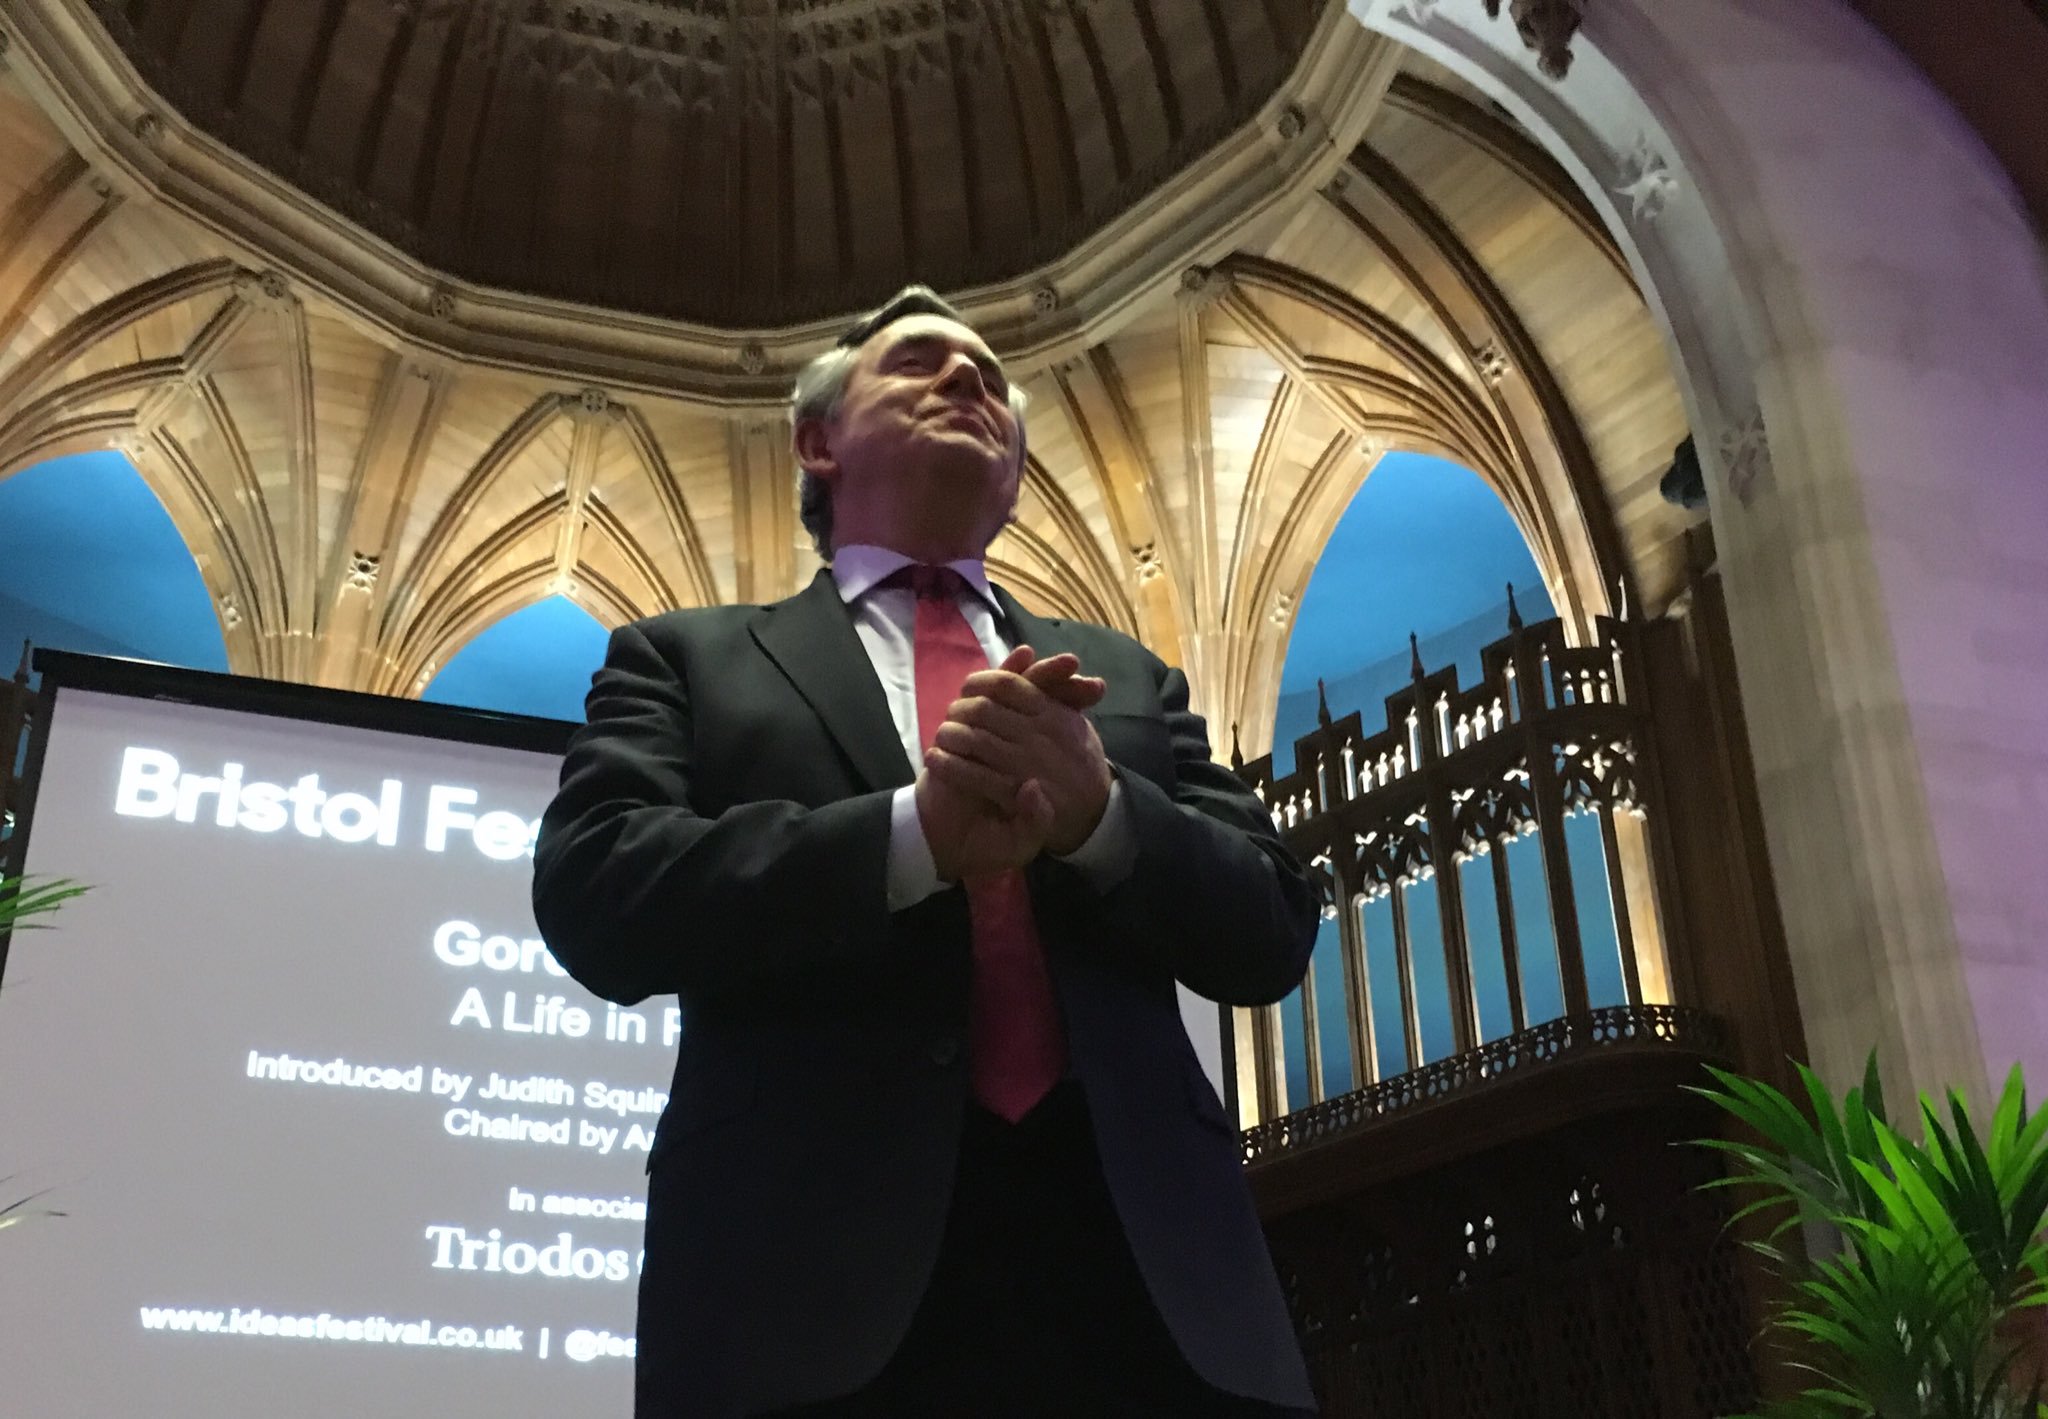 Gordon Brown speaks in the Great Hall of the Wills Memorial Building, as part of @FestivalofIdeas #economicsfest https://t.co/omY4WfHHYU